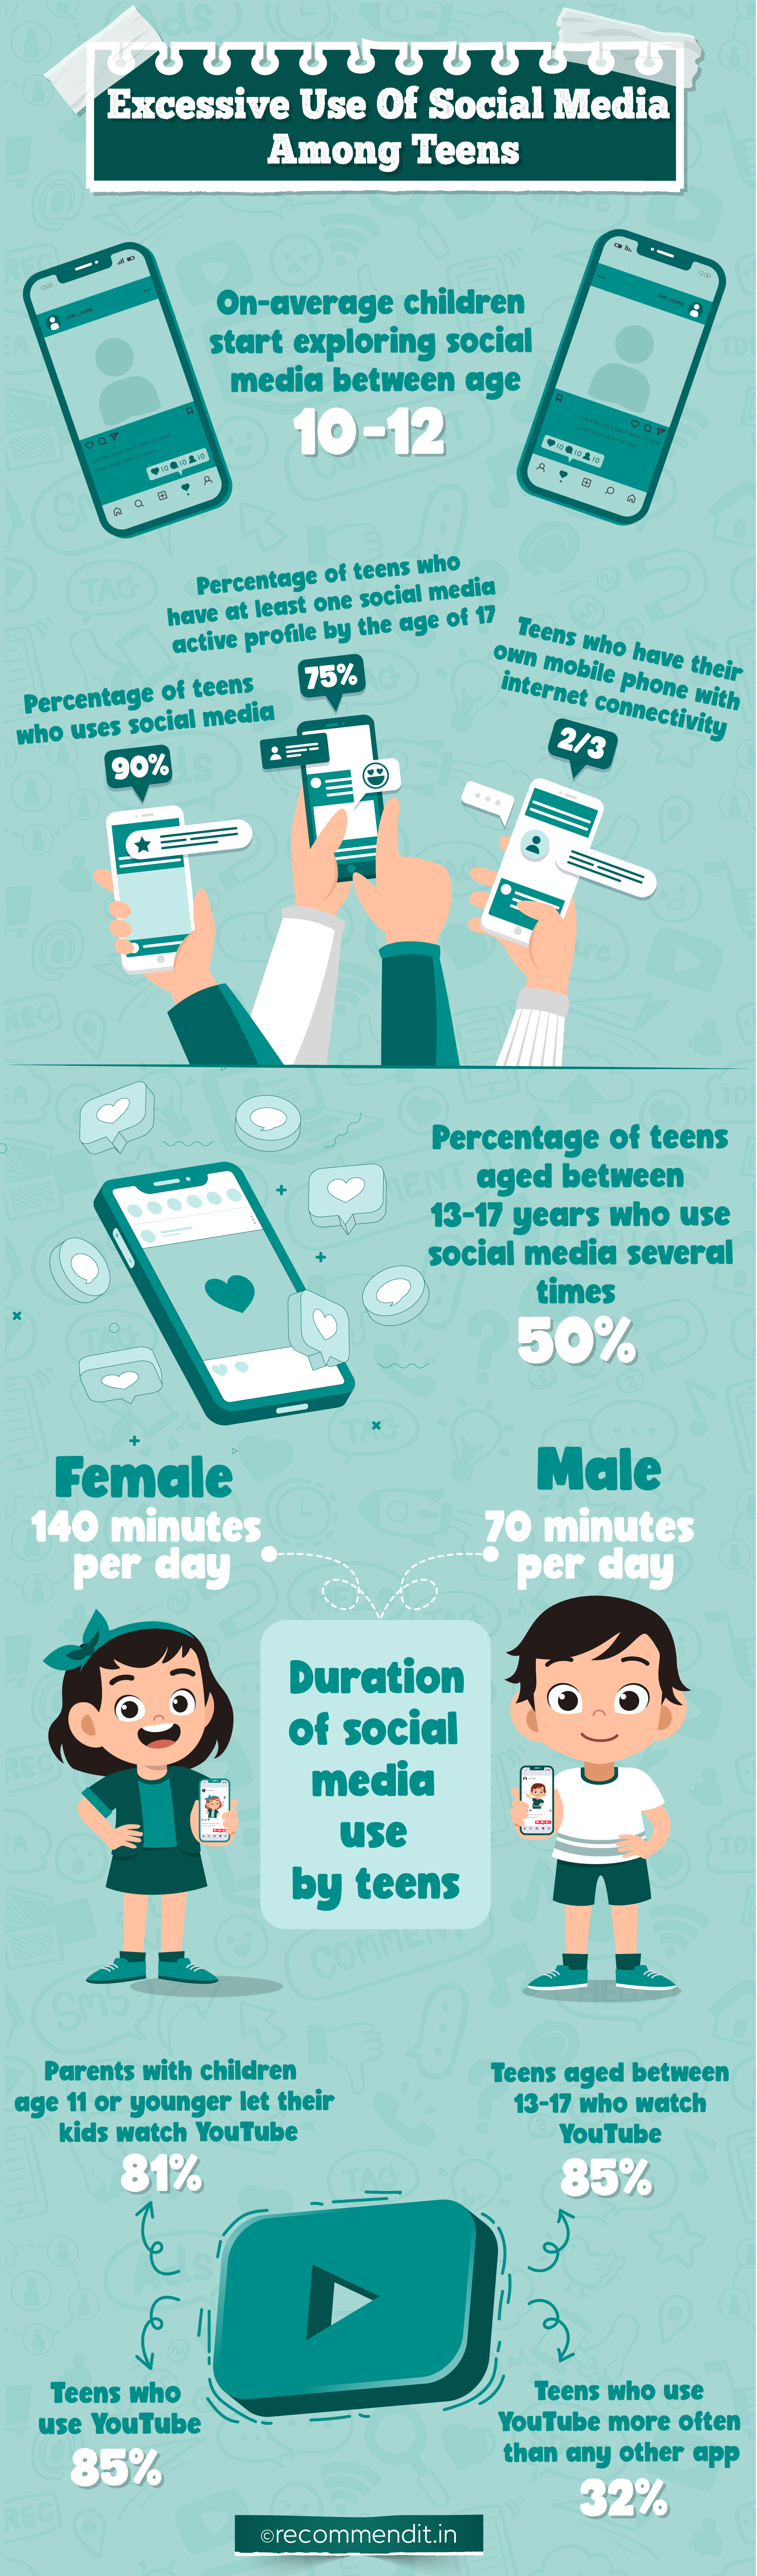 Excessive use of social media among teens